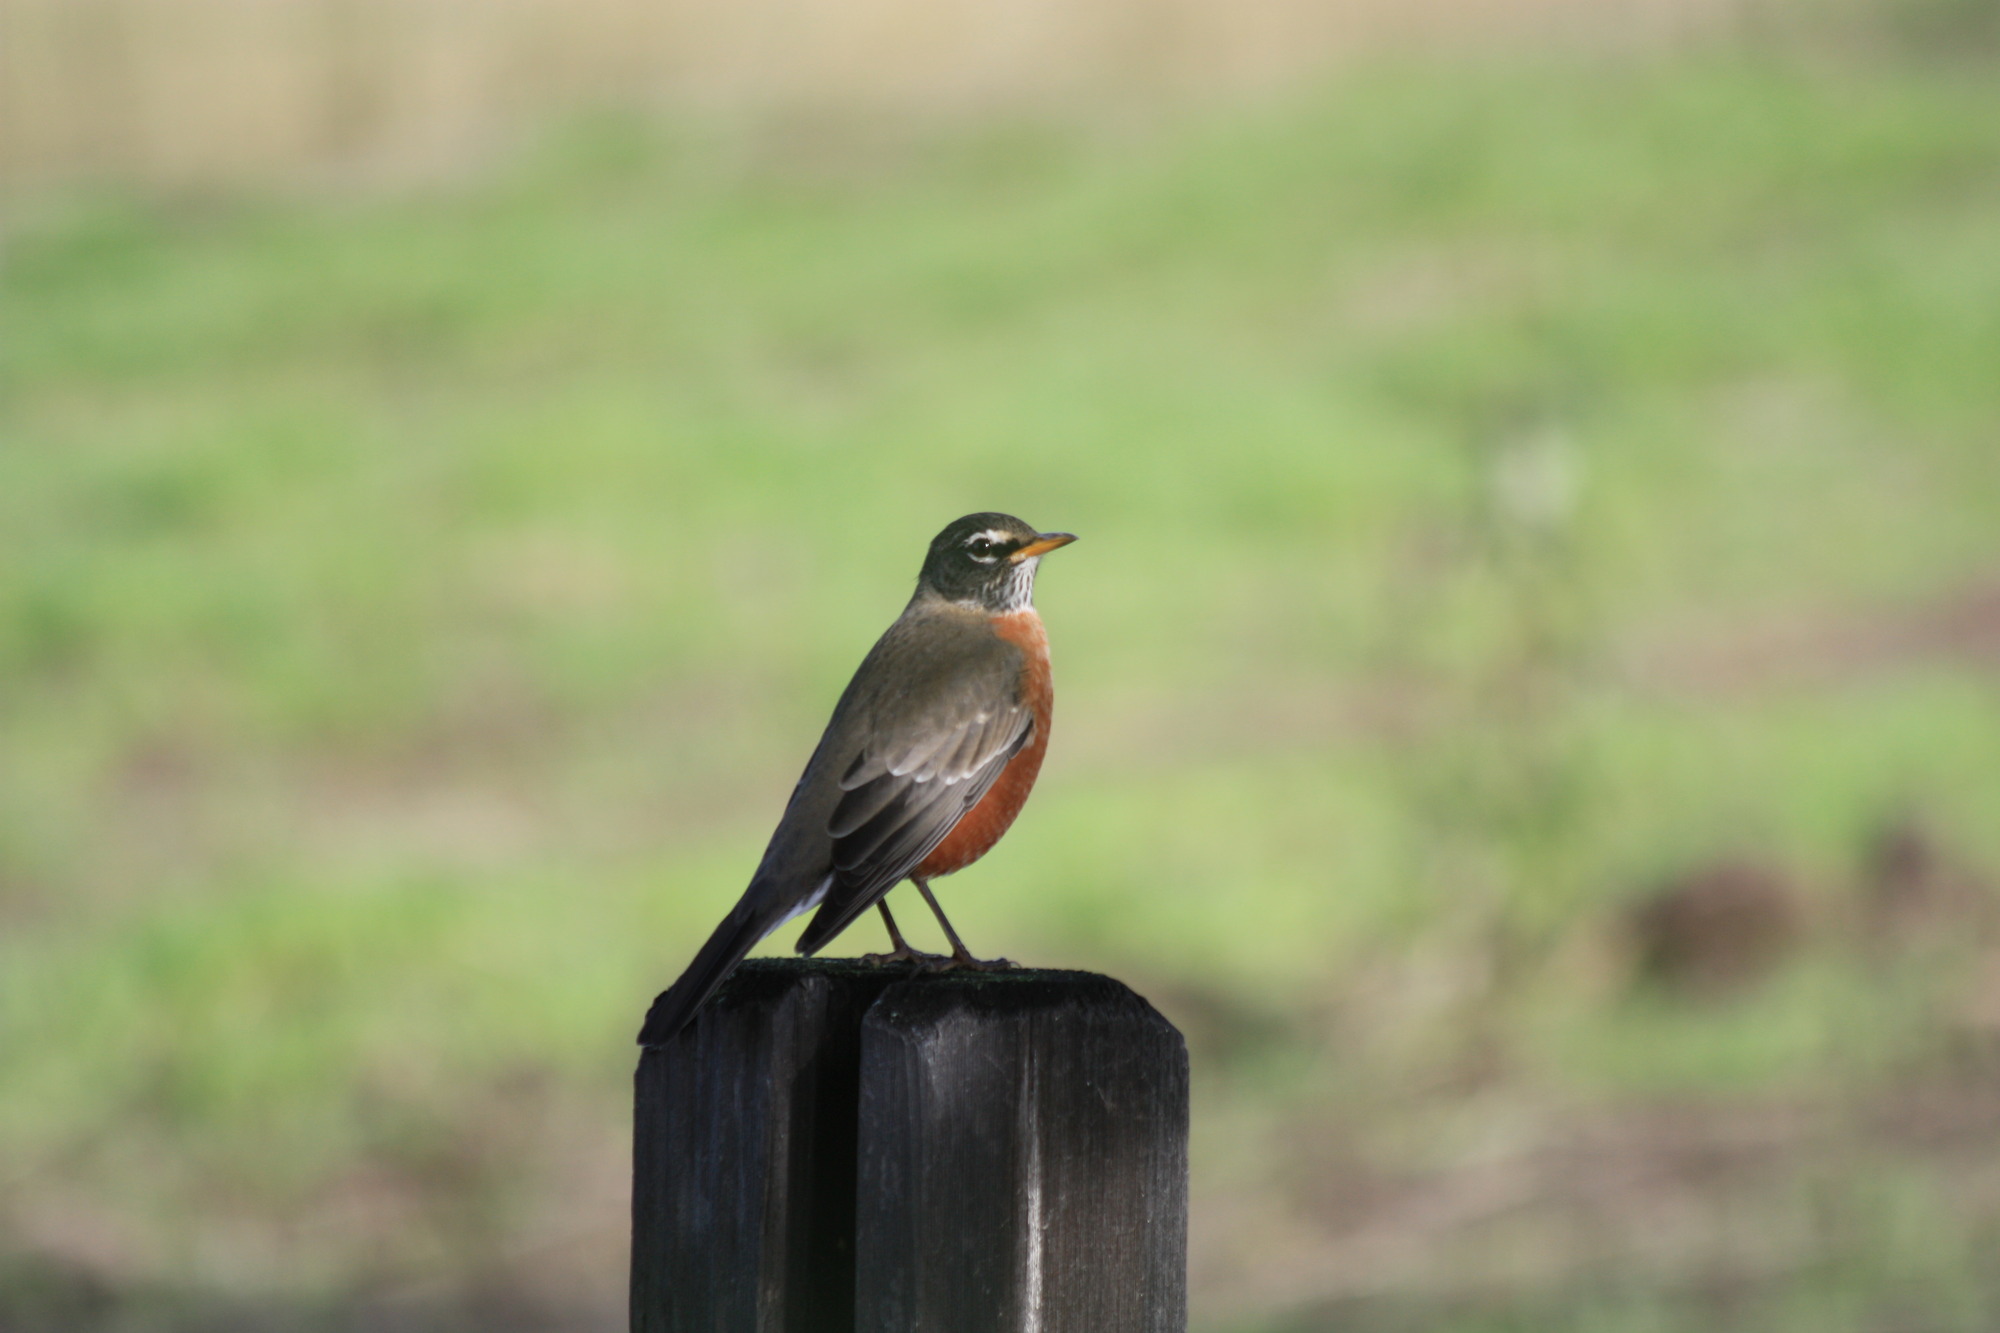 Dark brown bird with reddish breast perched on a post